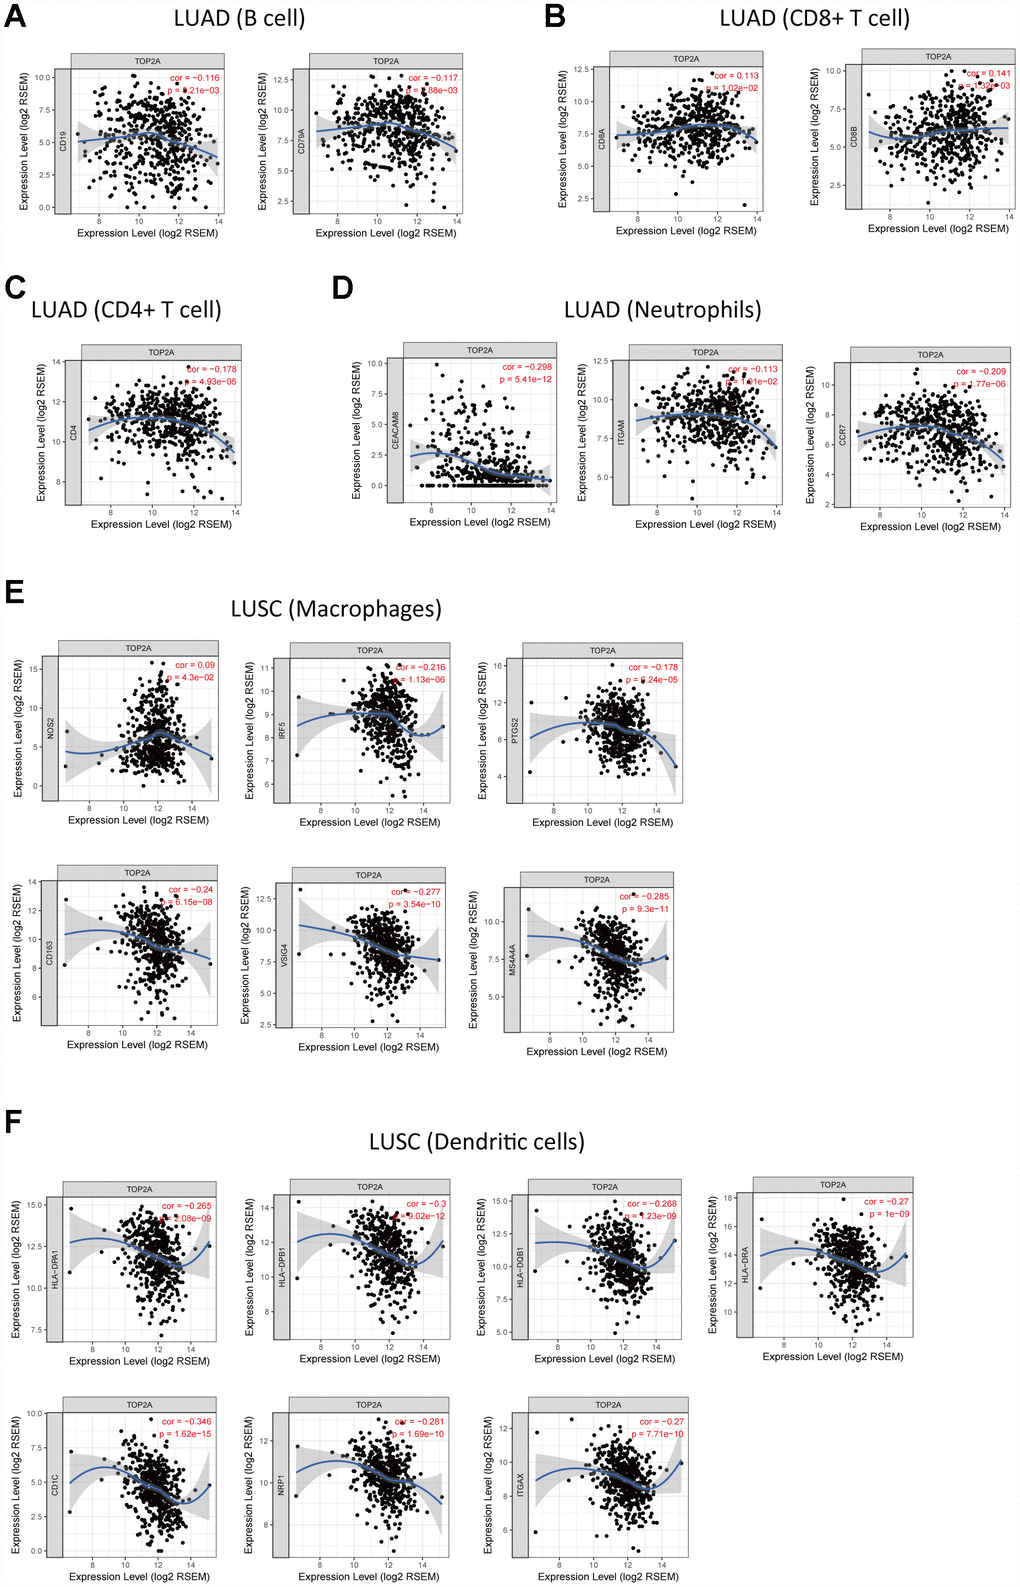 Correlation of TOP2A expression with gene markers of tumor-infiltrating immune cells in NSCLC. (A) Correlation with gene markers of B cells in LUAD. (B) Correlation with gene markers of CD8+ T cells in LUAD. (C) Correlation with gene markers of CD4+ T cells in LUAD. (D) Correlation with gene markers of neutrophils in LUAD. (E) Correlation with gene markers of macrophages in LUSC. (F) Correlation with gene markers of DCs in LUSC.